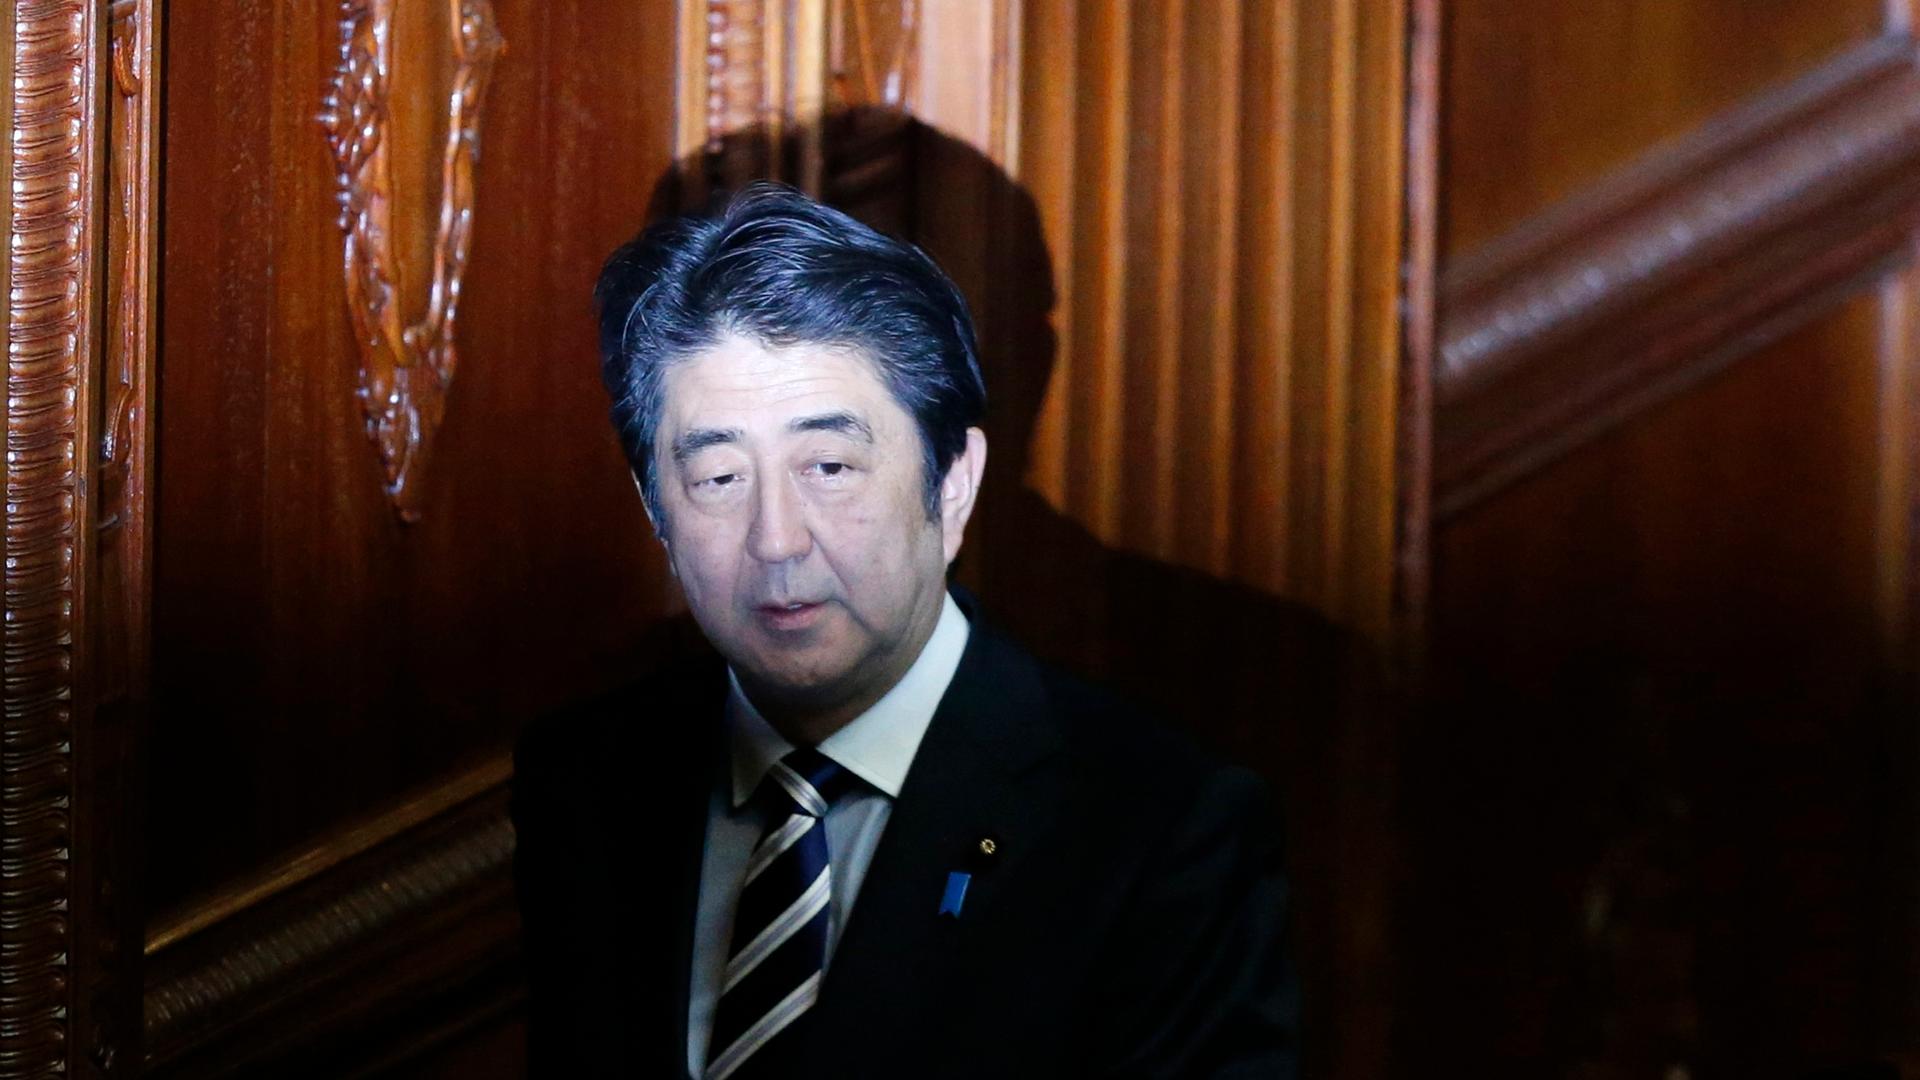 The government of Japanese Prime Minister Shinzo Abe is proposing to restore nuclear power to a prominent position in the country's energy mix, nearly three years after a triple meltdown at the Fukushima Daiichi nuclear power plant.